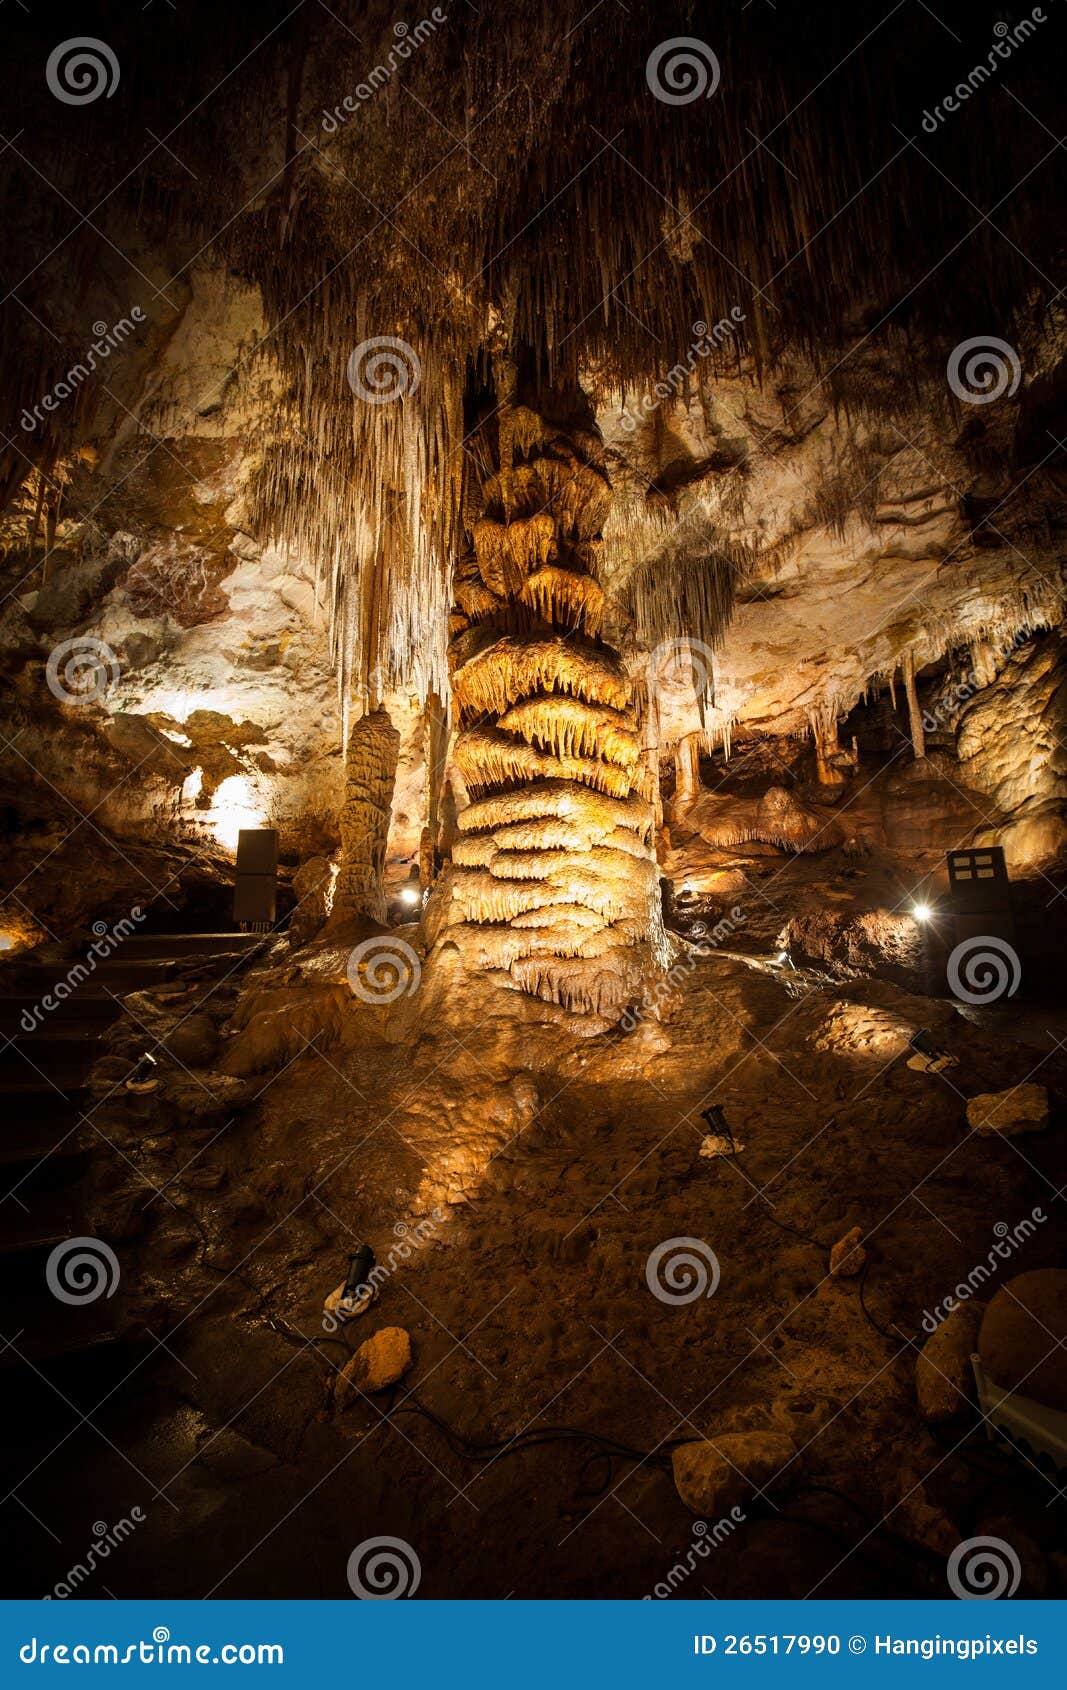 big stalagmite column formations in the cave